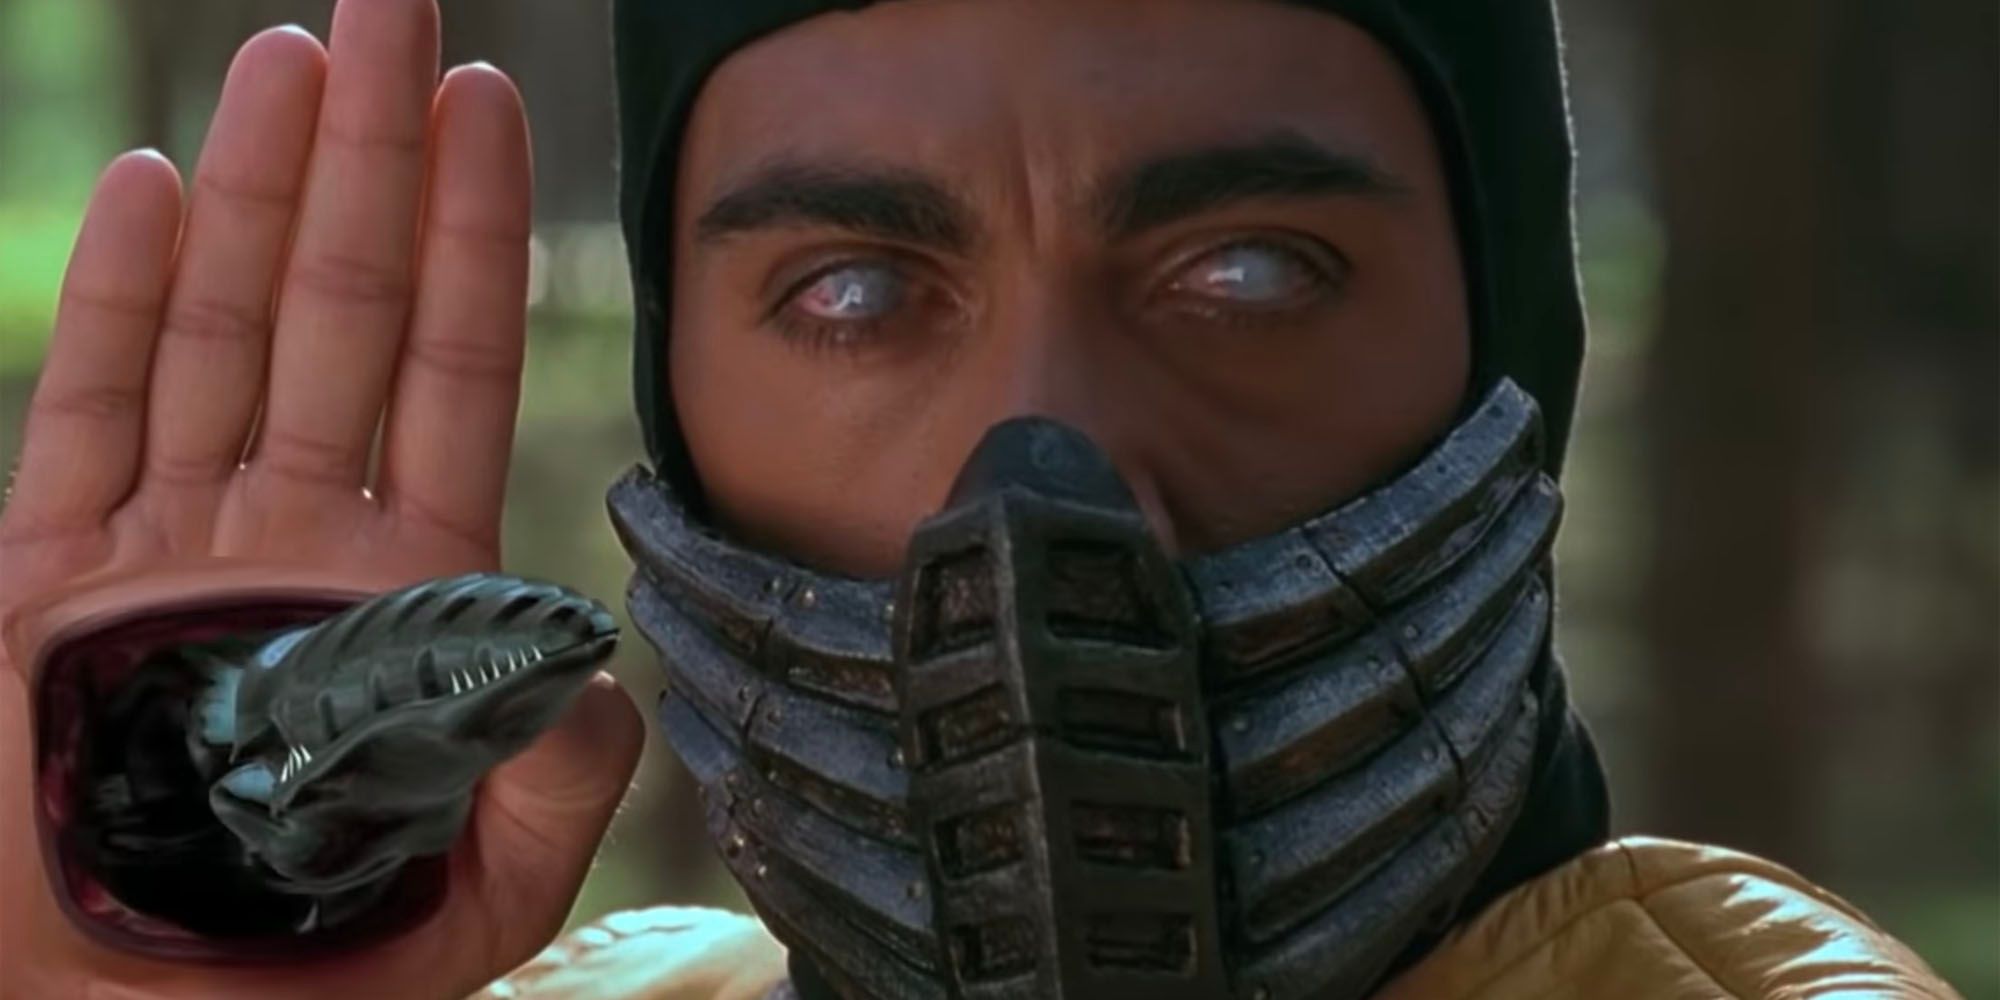 Scorpion's Snake Weapon emerges from his palm.